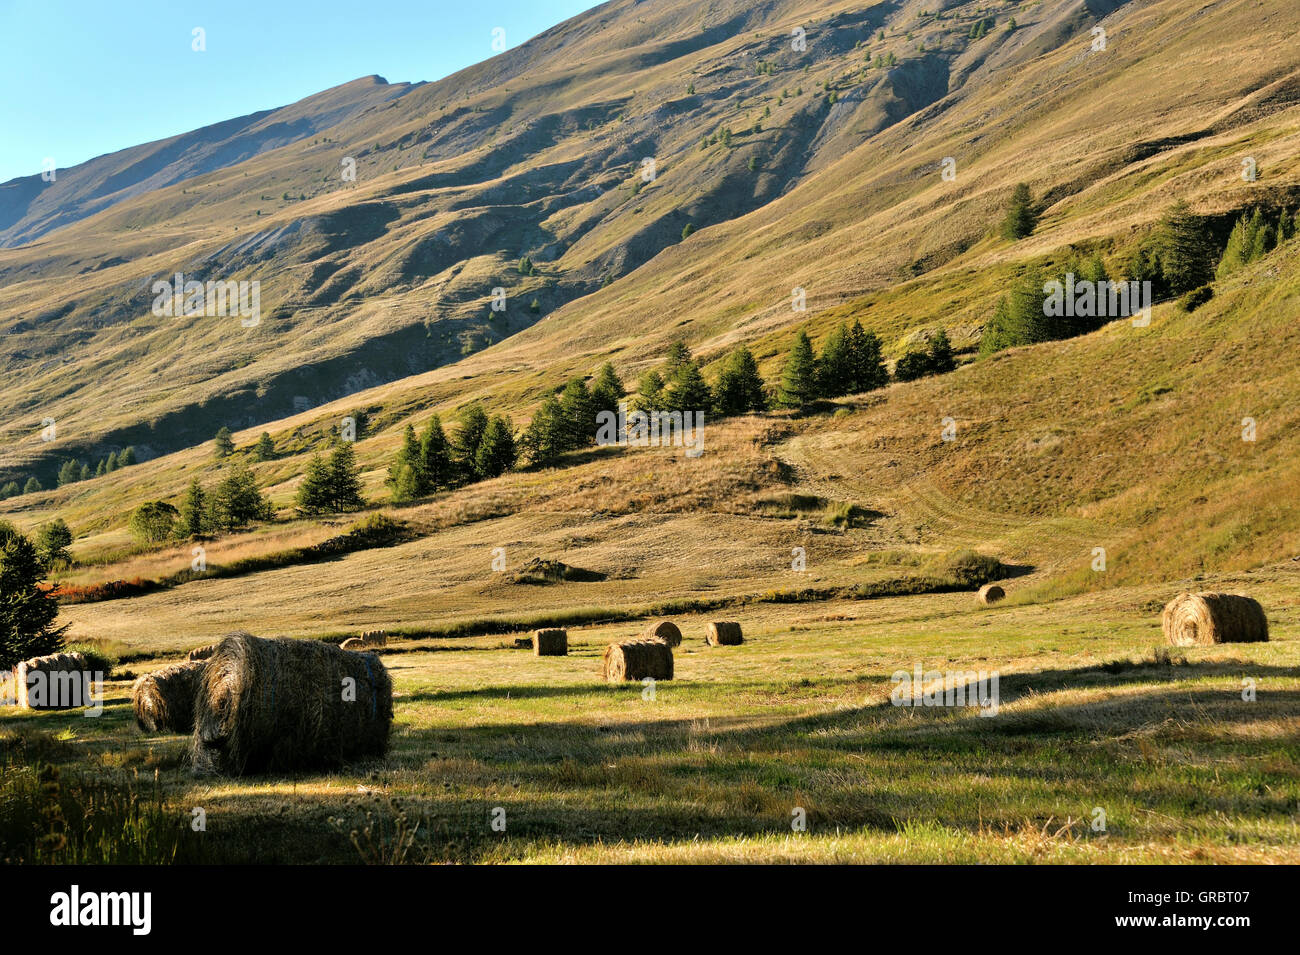 Moutain Pasture In The French Alps, France Stock Photo